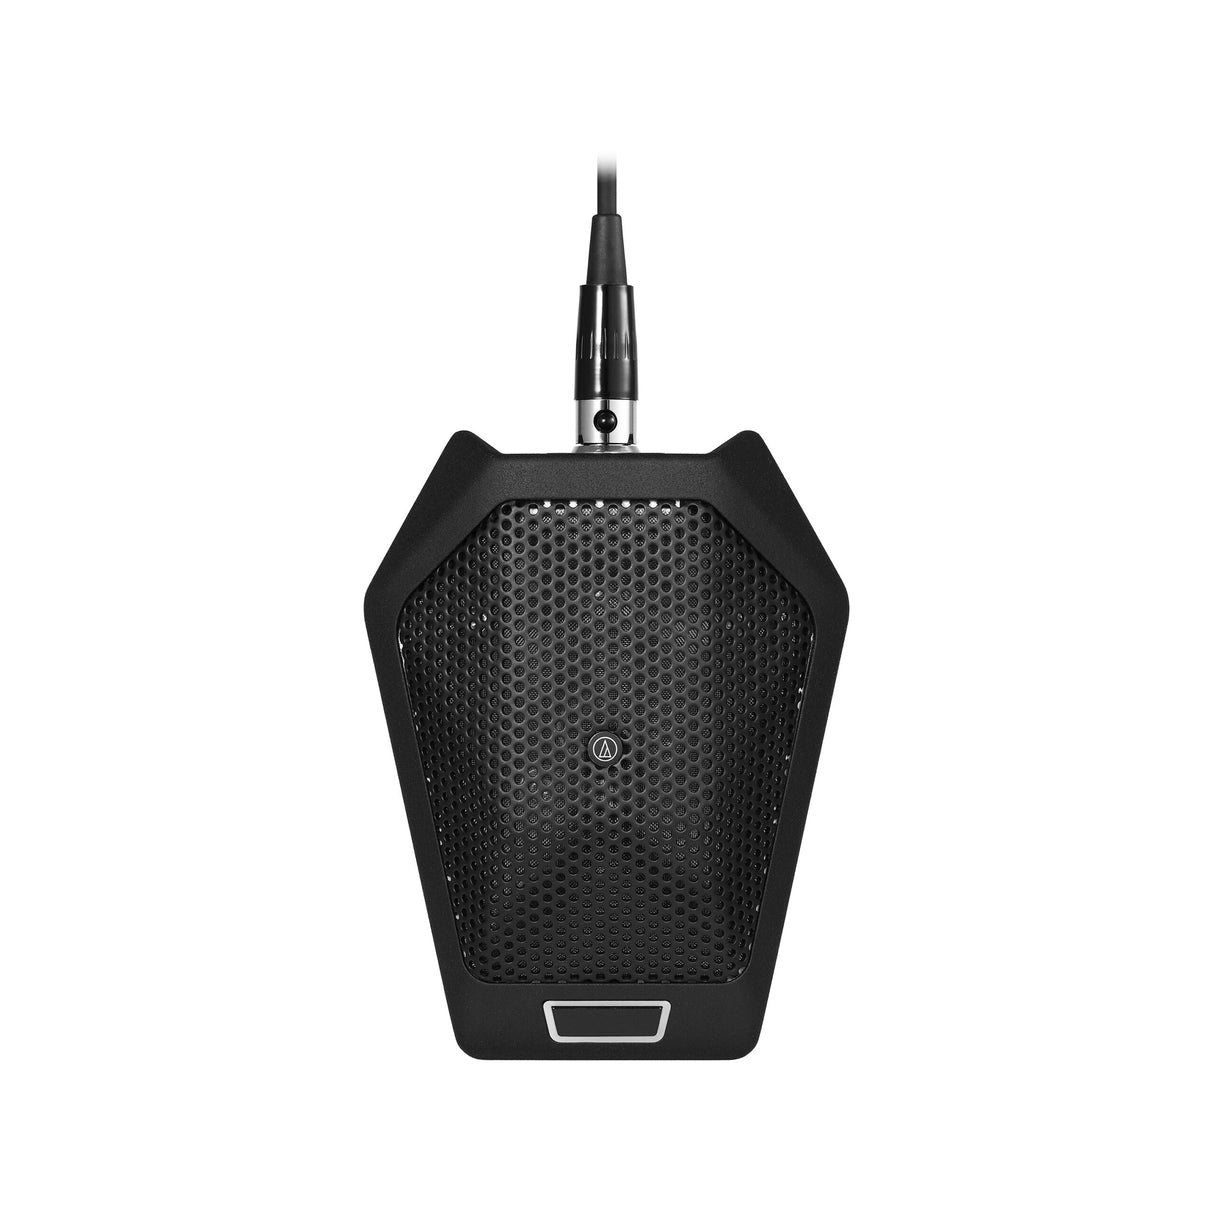 Audio-Technica U891Rb Cardioid Condenser Boundary Microphone with Switch, Black